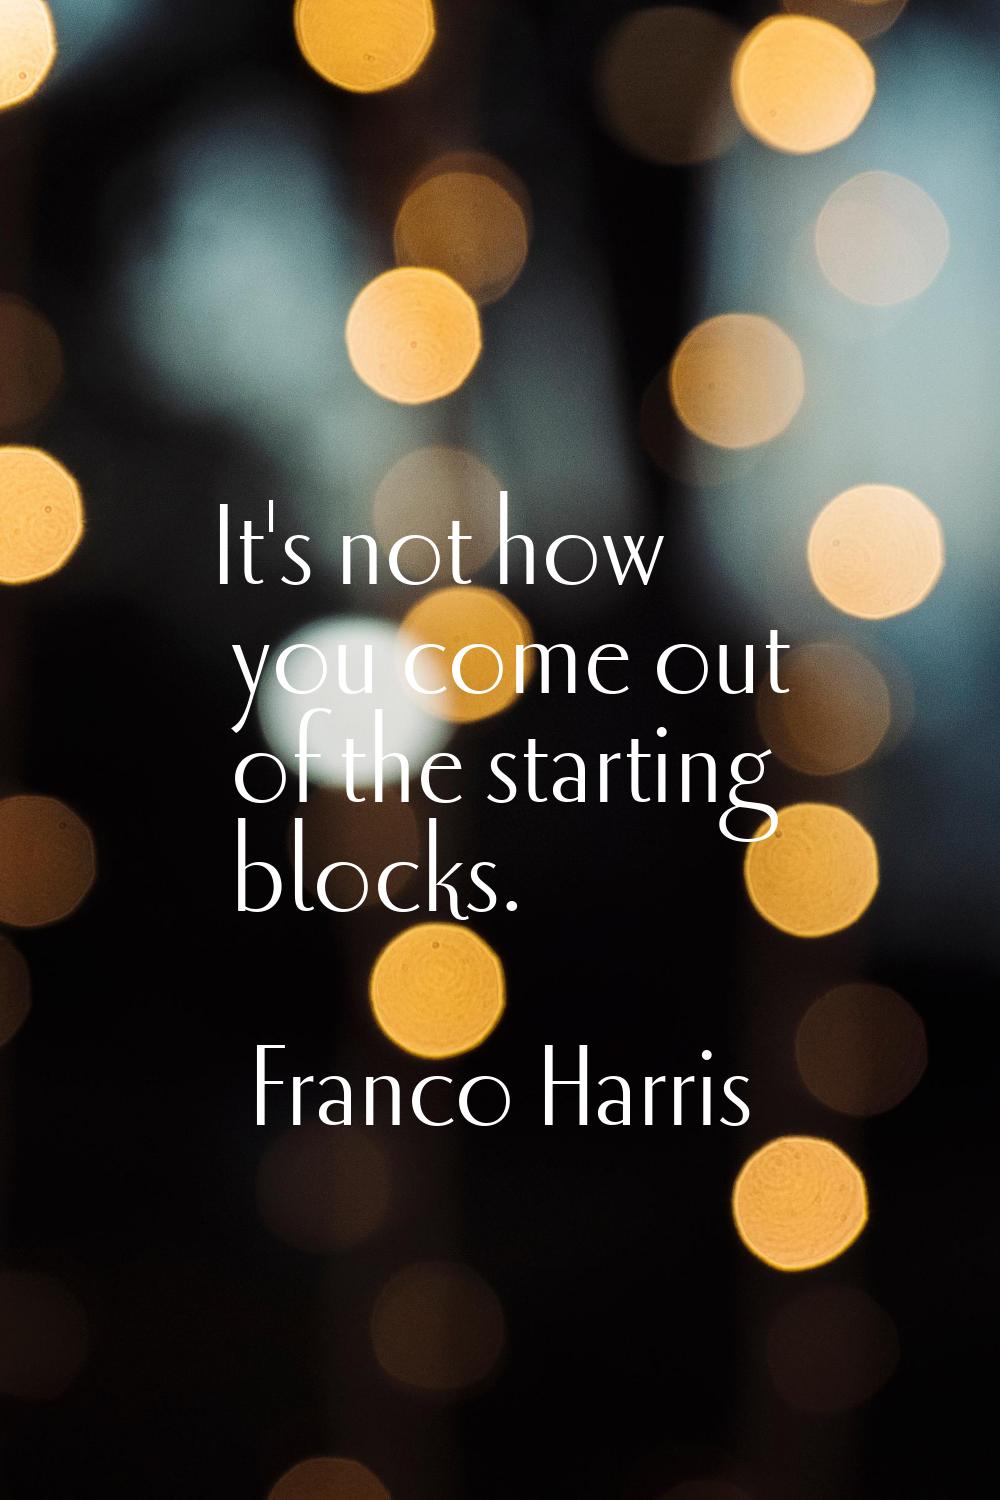 It's not how you come out of the starting blocks.